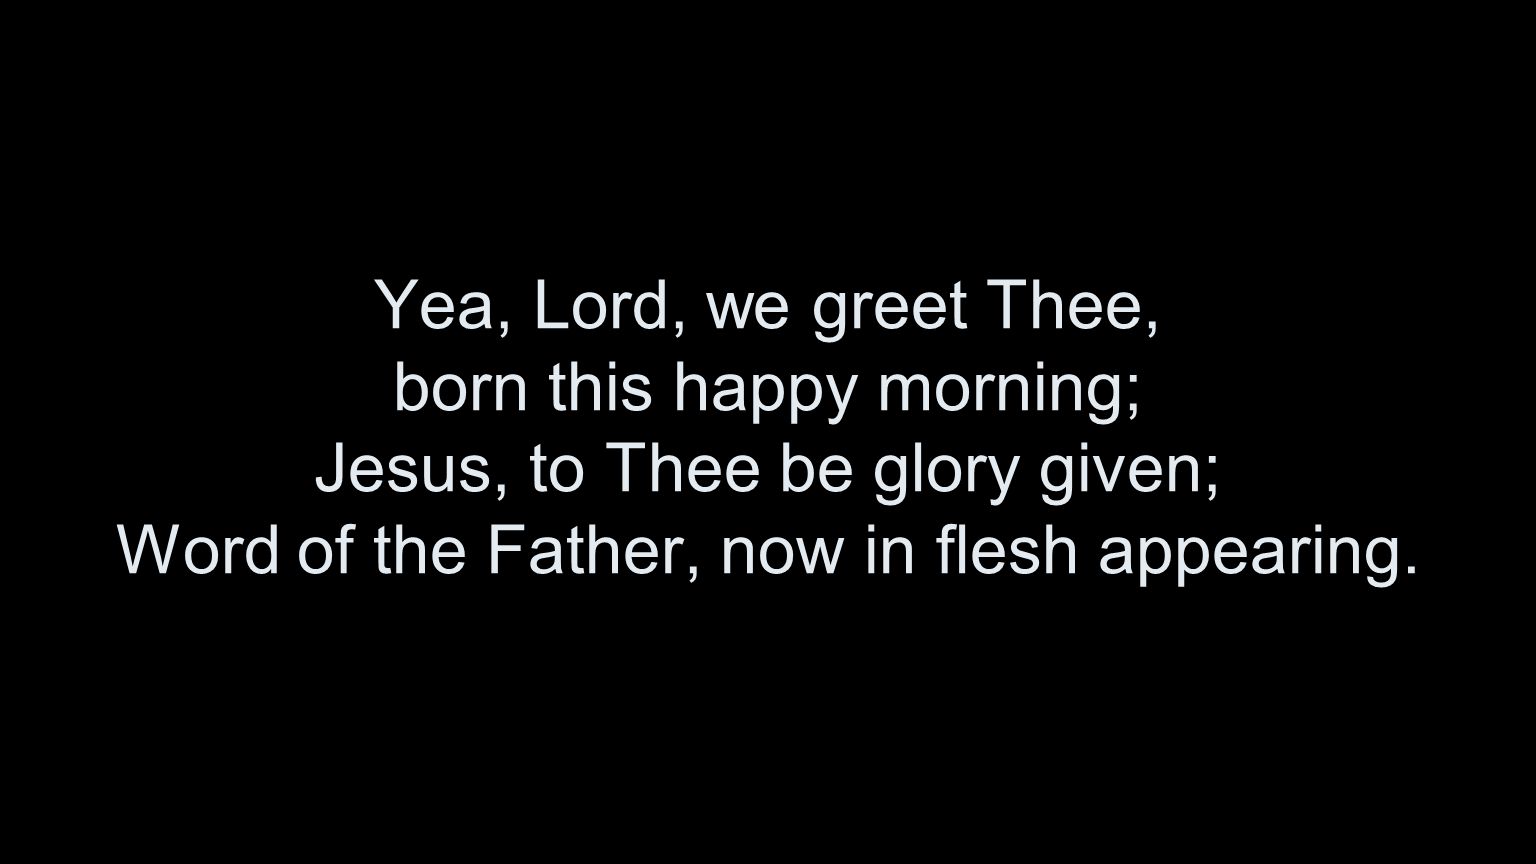 Yea, Lord, we greet Thee, born this happy morning; Jesus, to Thee be glory given; Word of the Father, now in flesh appearing.